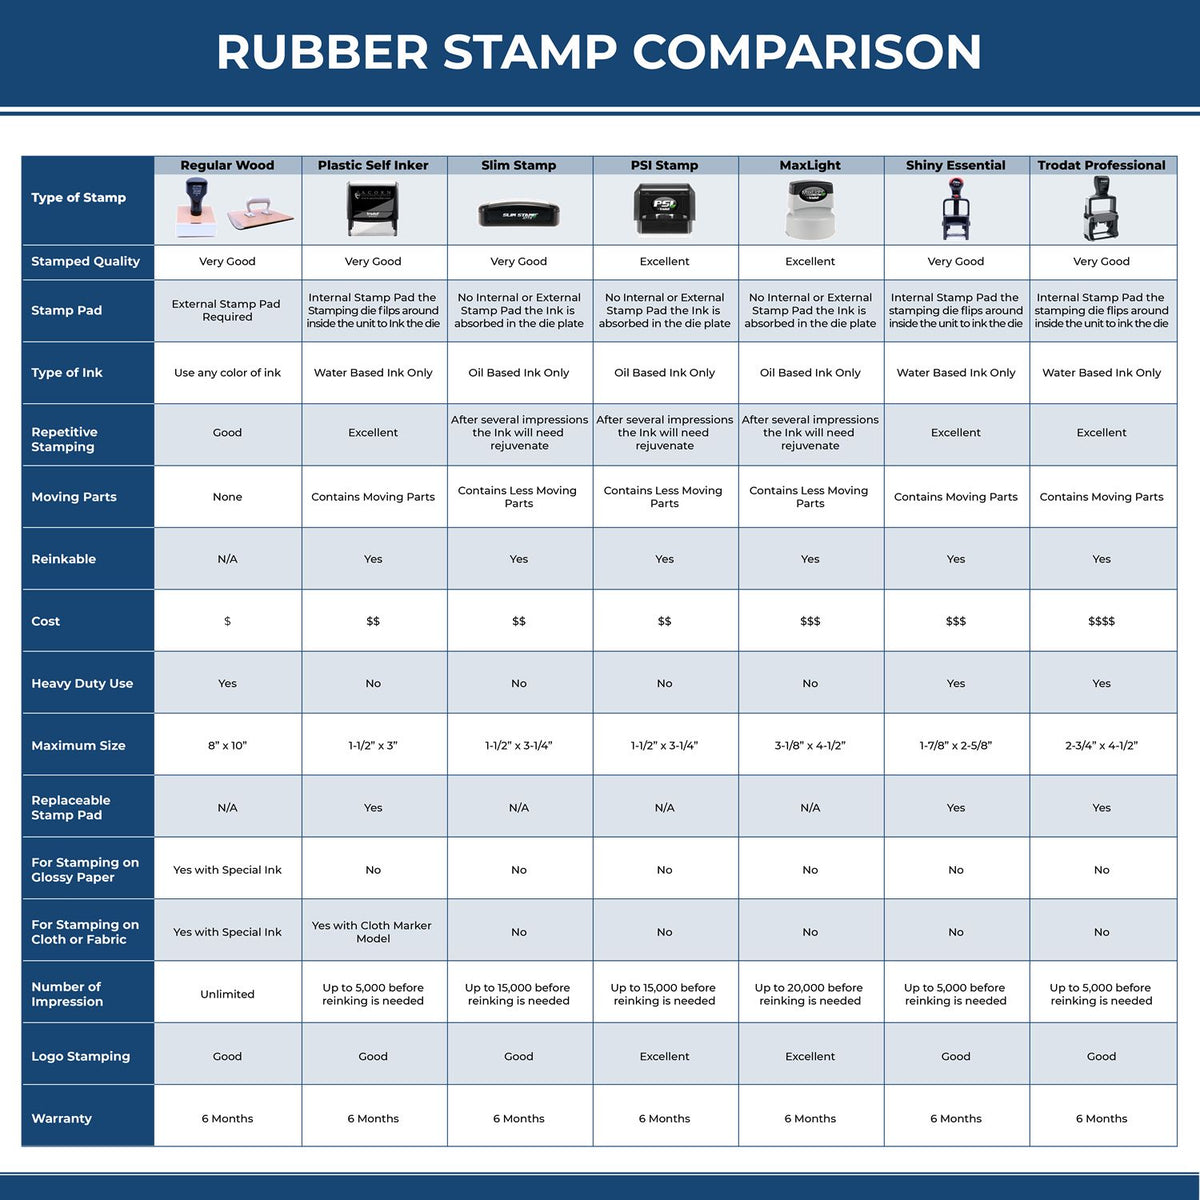 Large Forgery Rubber Stamp 4564R Rubber Stamp Comparison